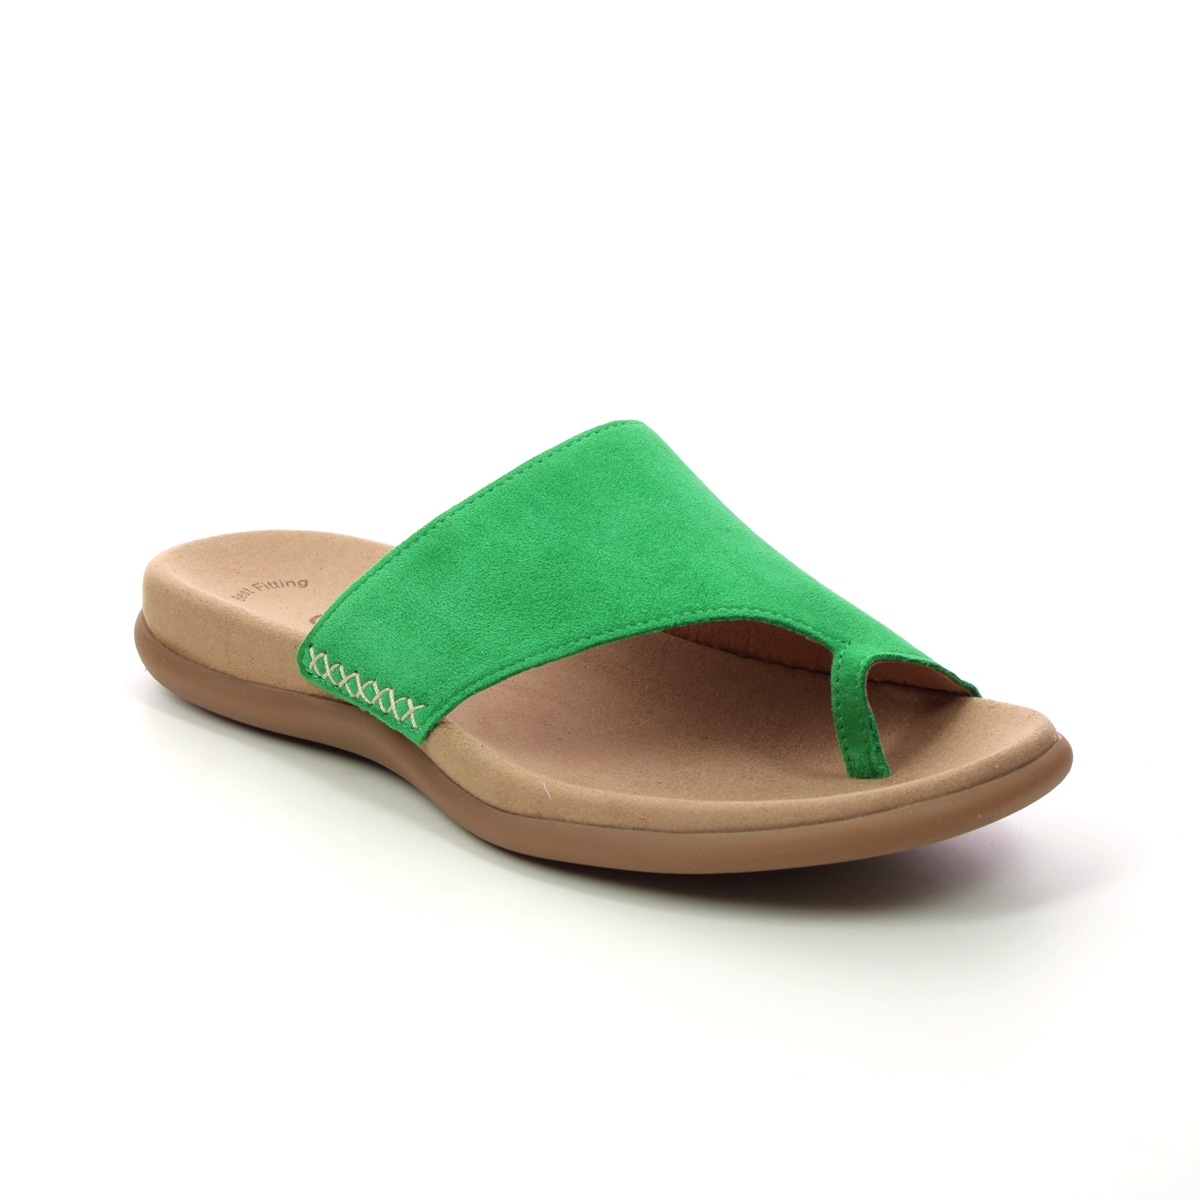 Gabor Lanzarote Green Suede Womens Toe Post Sandals 23.700.11 in a Plain Leather in Size 37